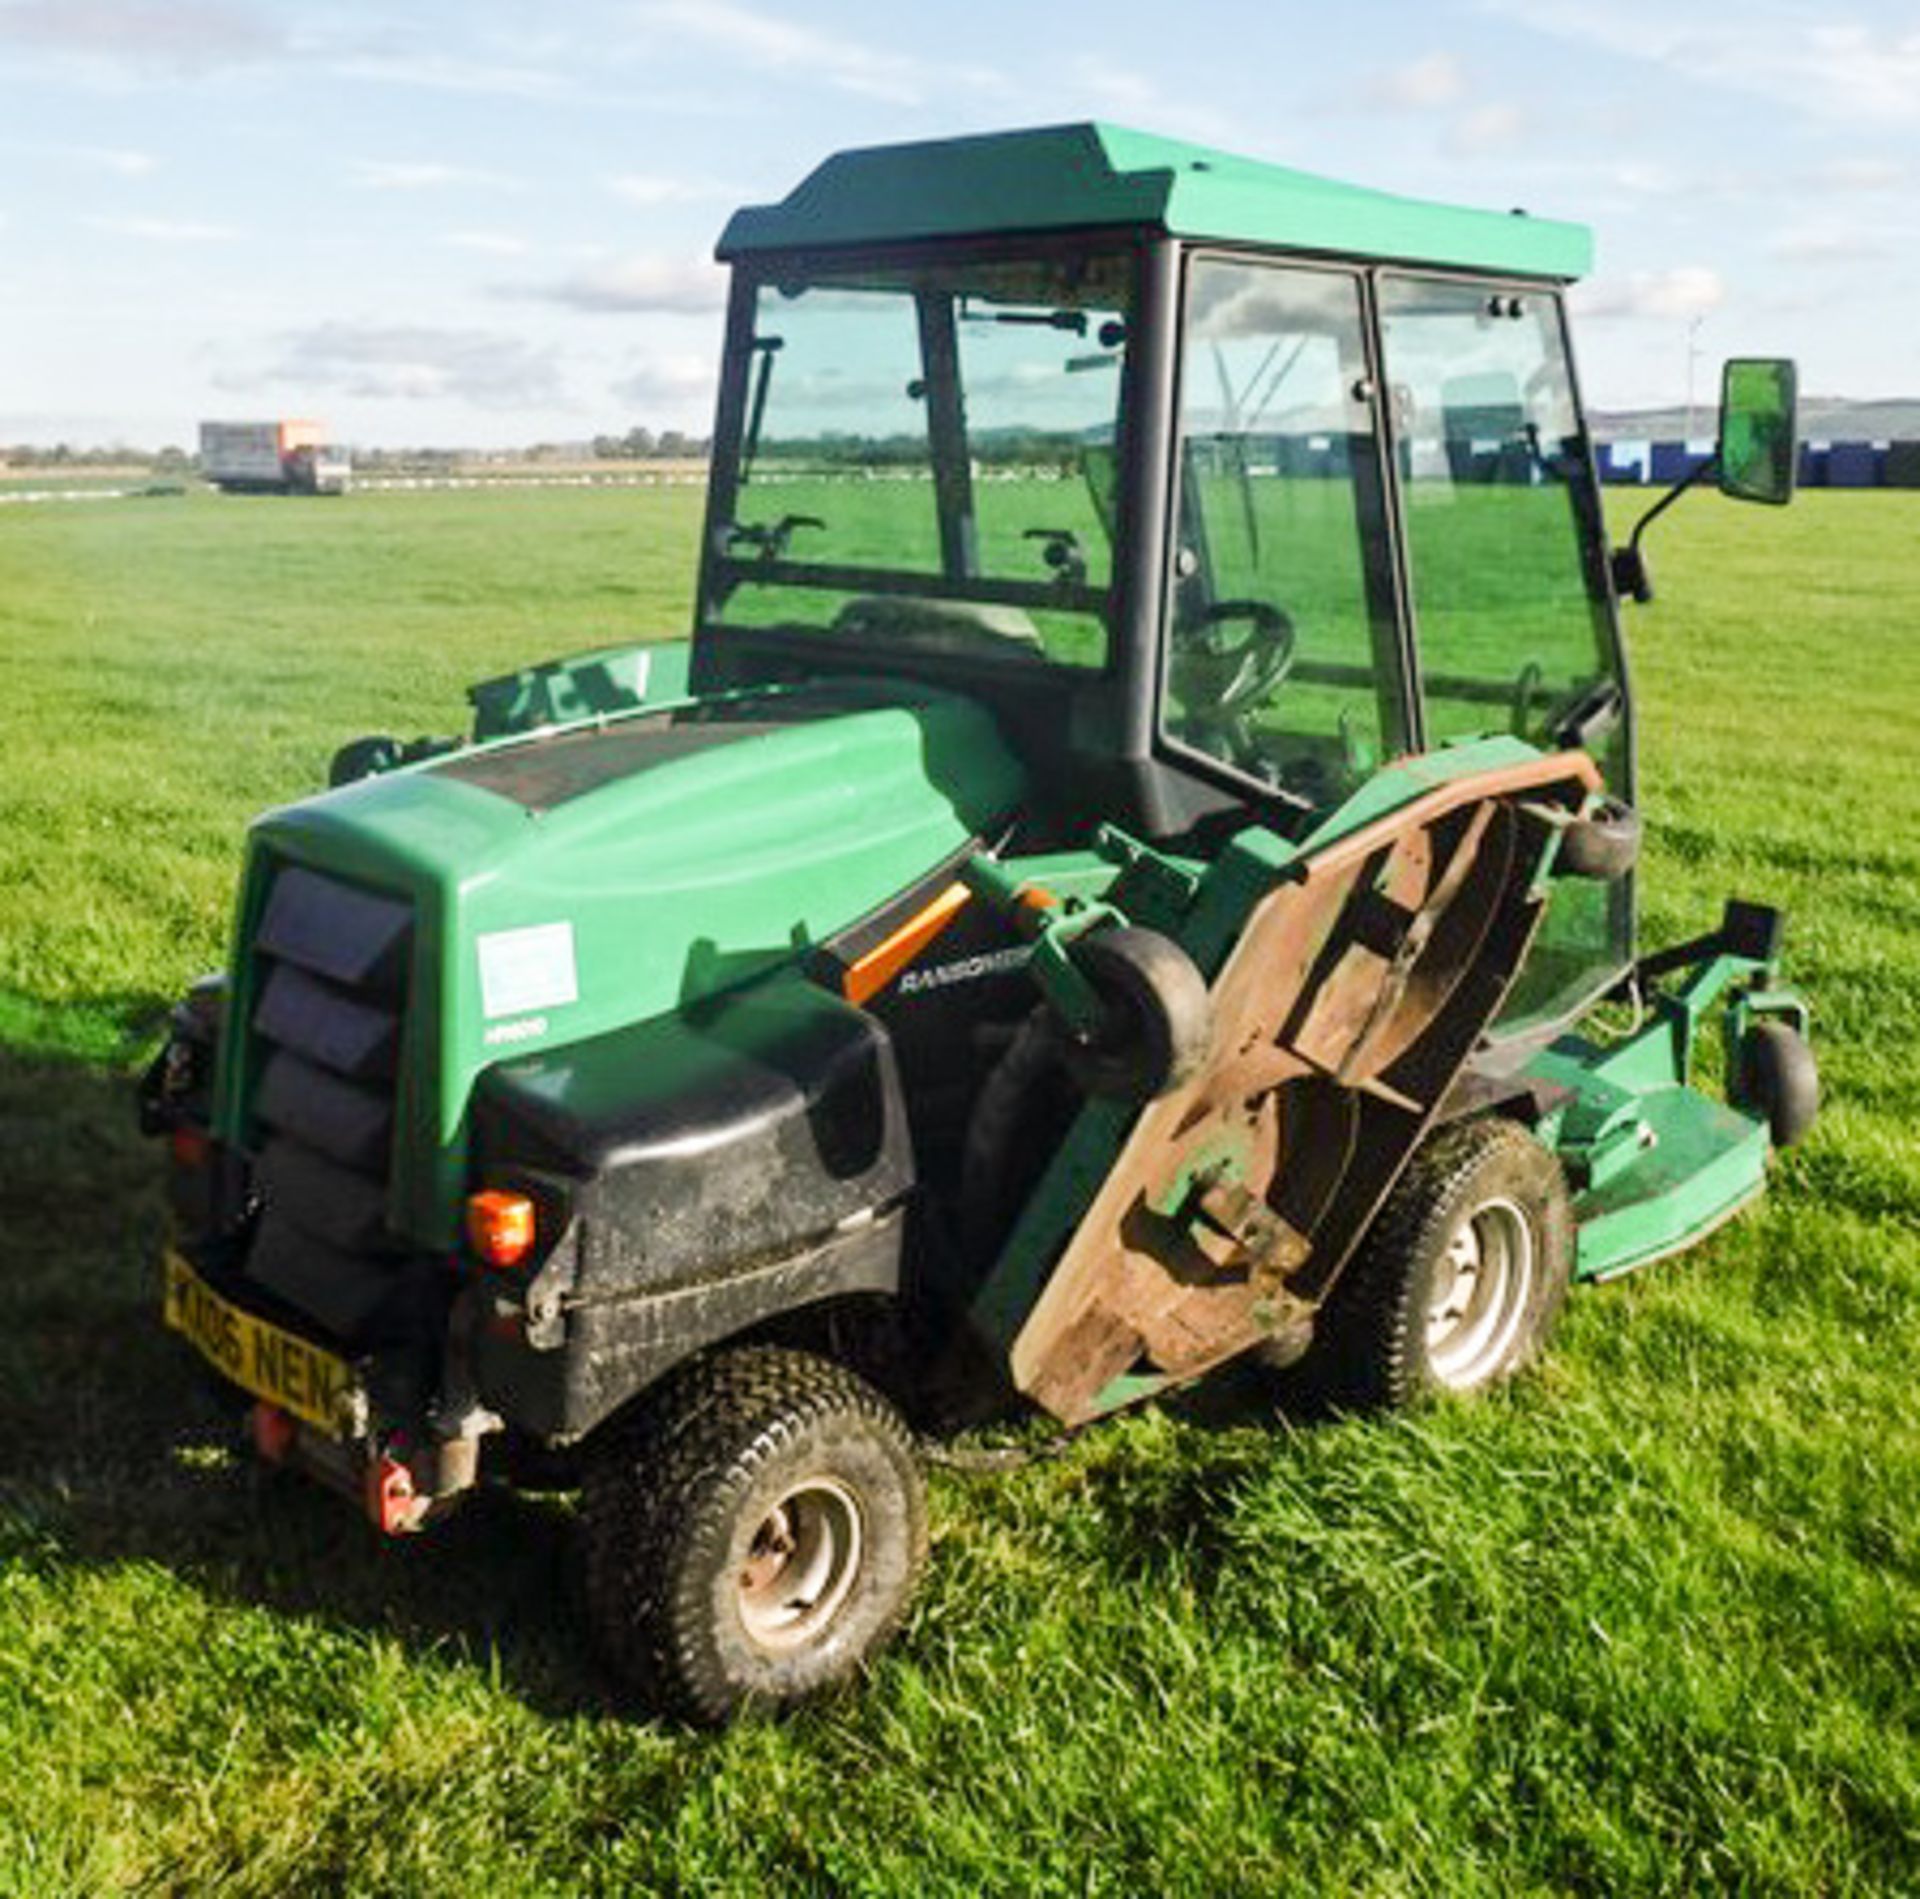 2006 RANSOME HF6010 BATWING ROTARY MOWER, CUTS APPROX 10FT 6INCHS, PERKINS 6 CYLINDER ENGINE, REG KX - Image 10 of 14